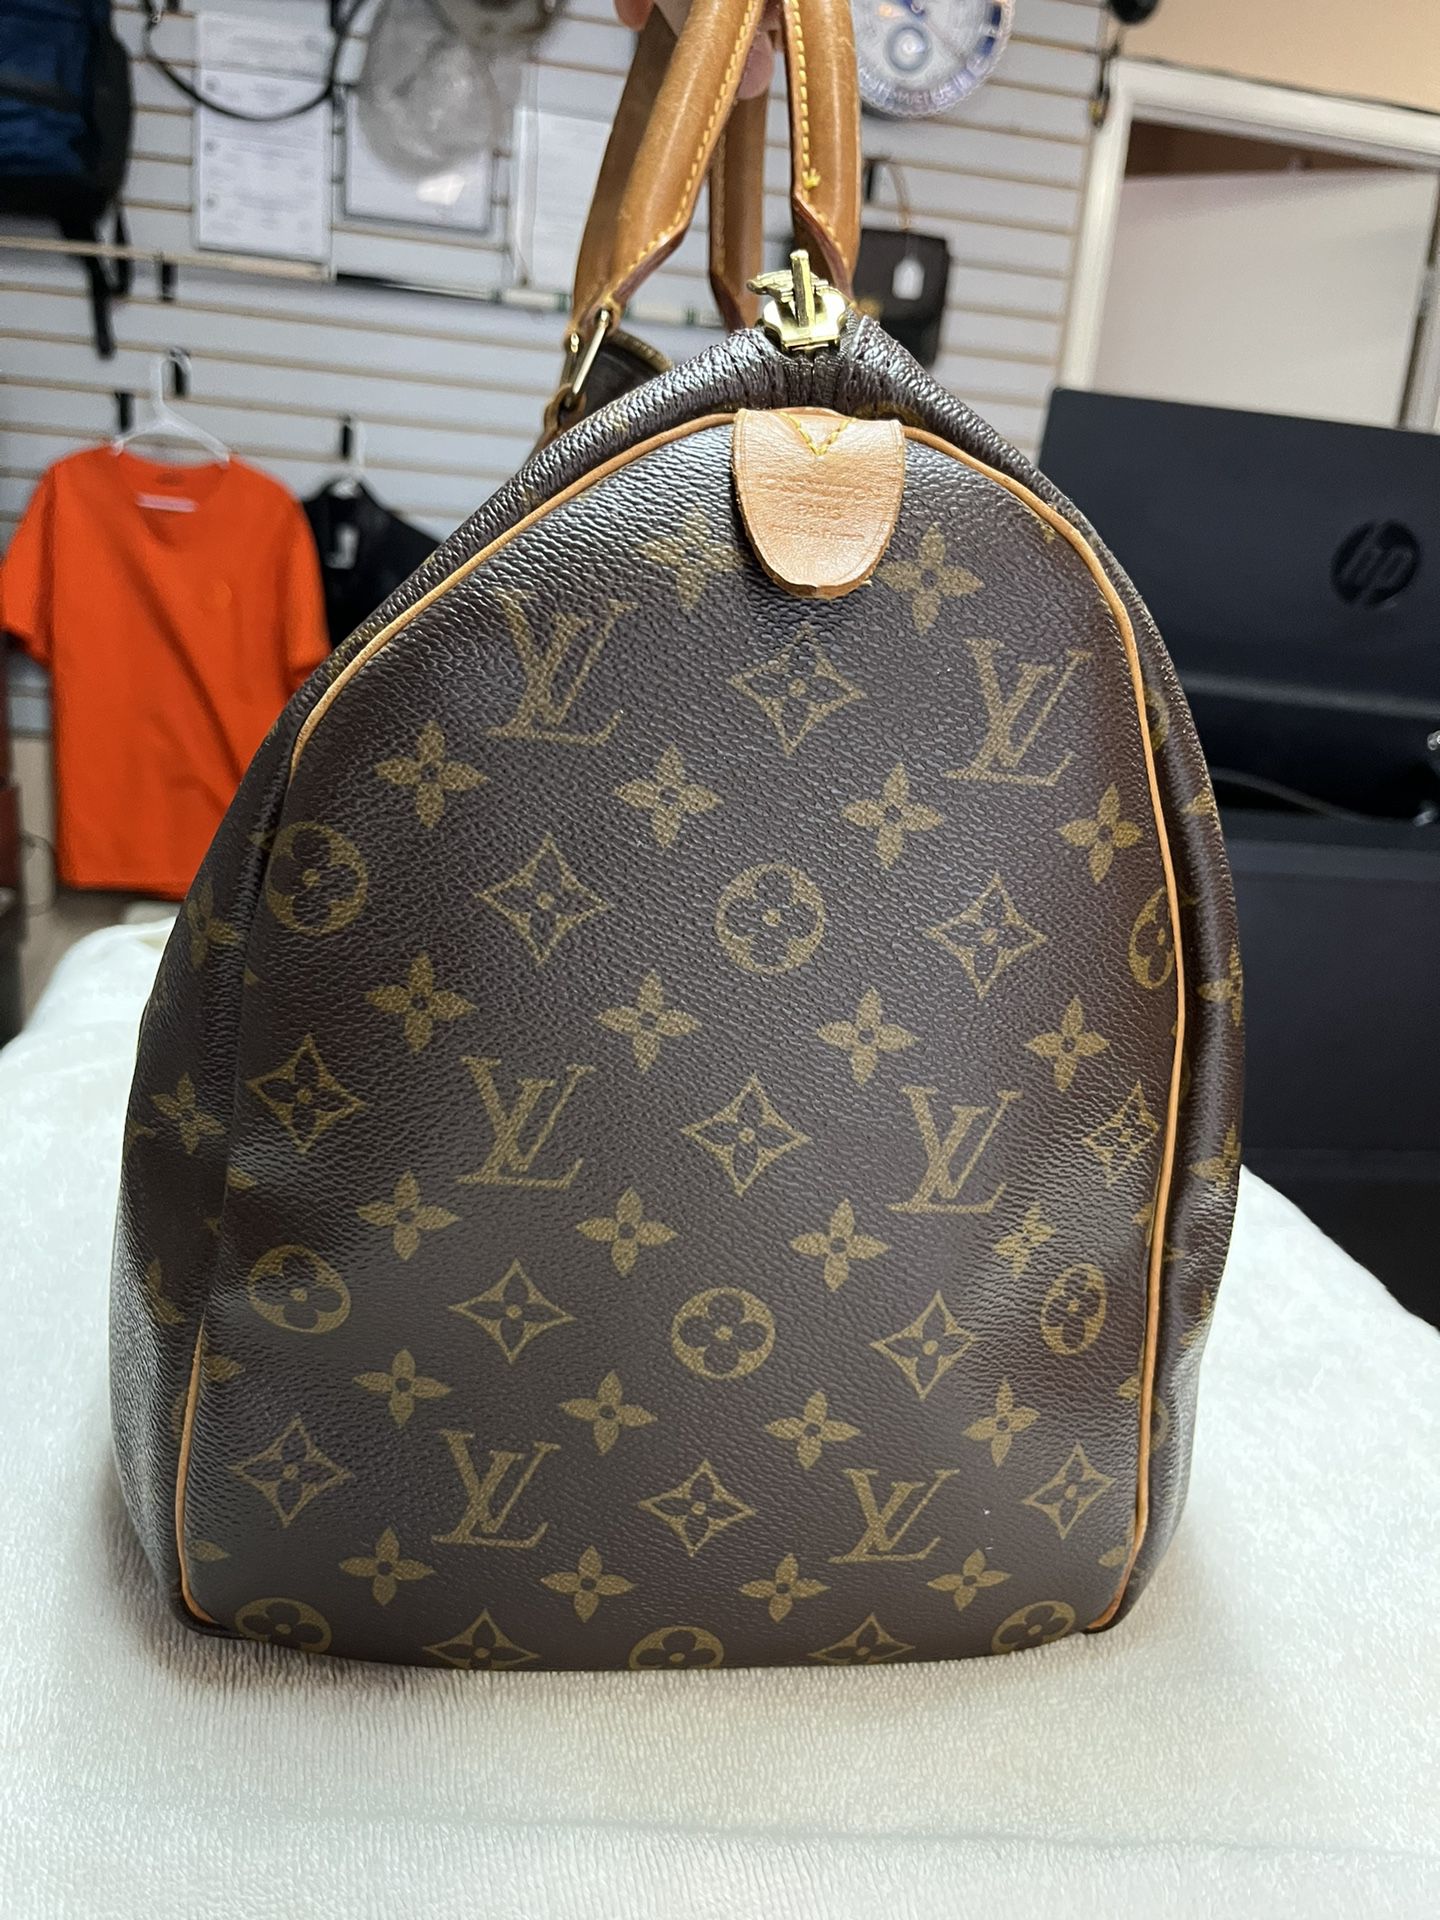 Louis Vuitton Monogram Keepall 45 Duffle Bag for Sale in Indio, CA - OfferUp